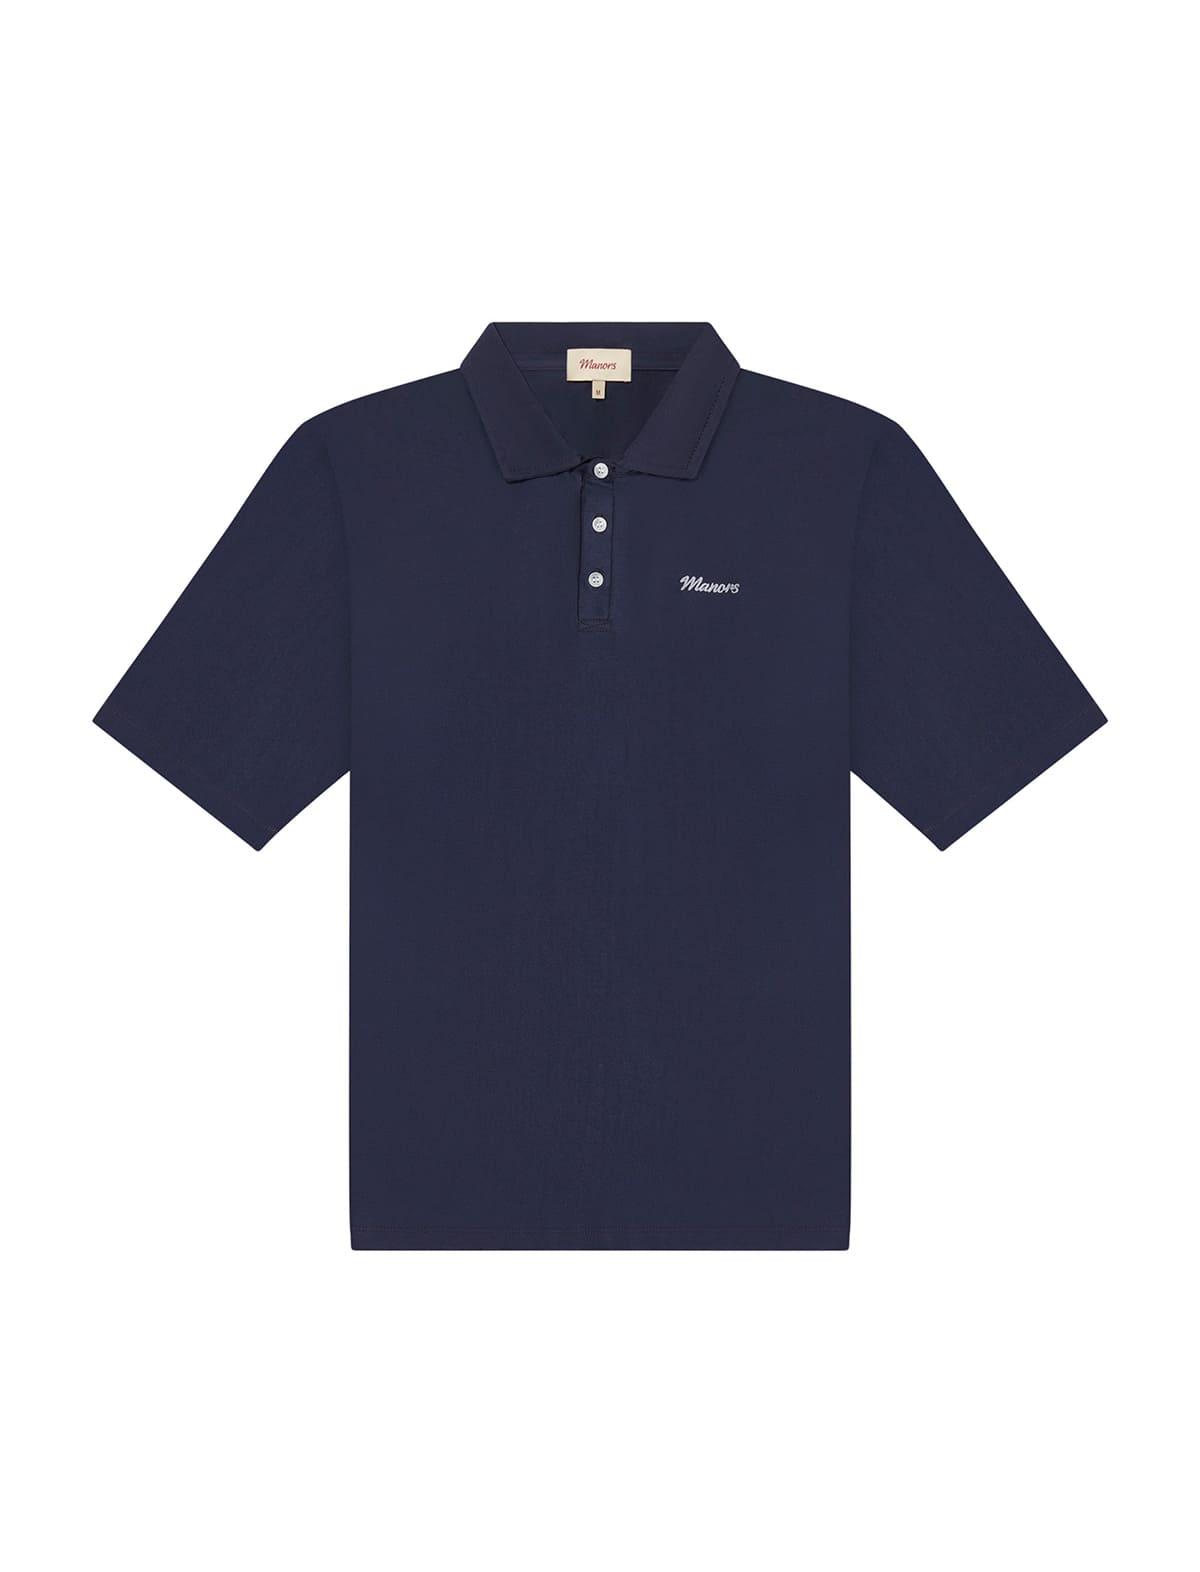 MANORS GOLF Classic Polo Shirt in Navy